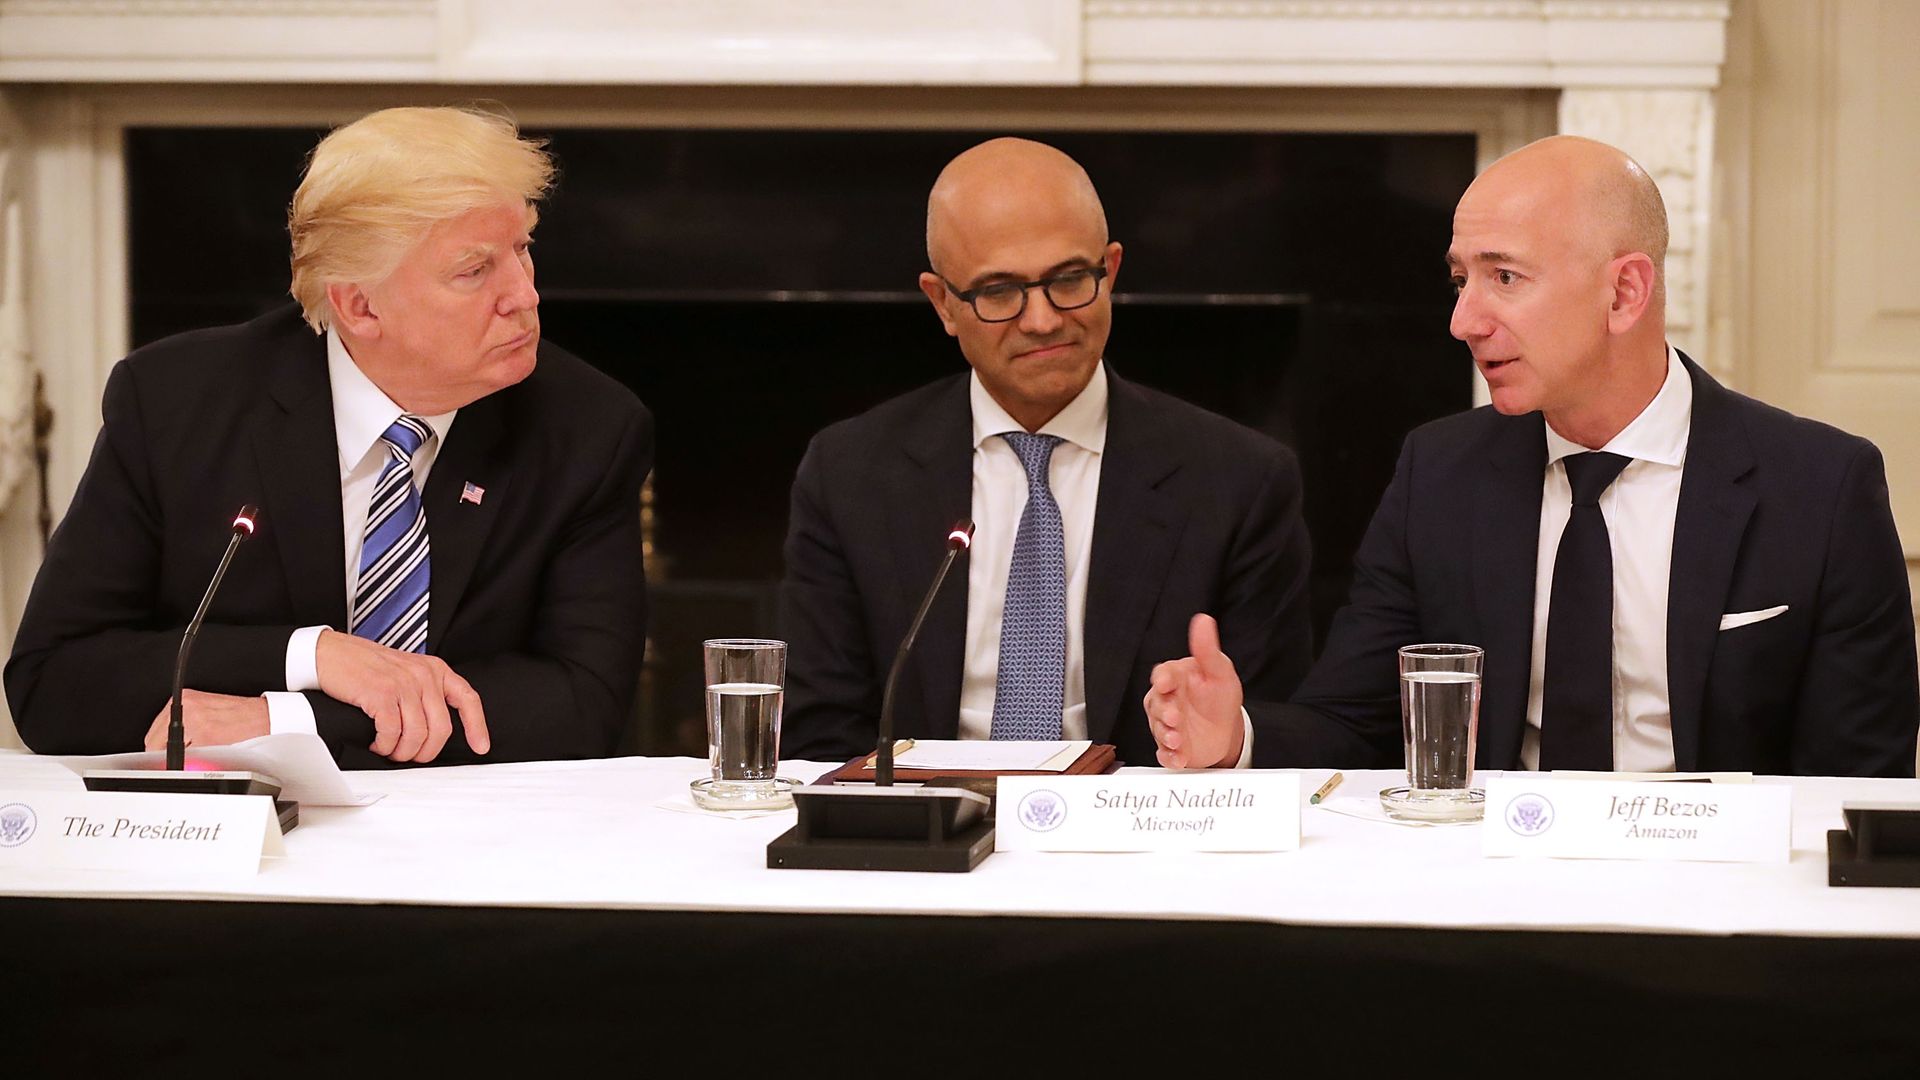 Donald Trump with the CEOs of Microsoft and Amazon